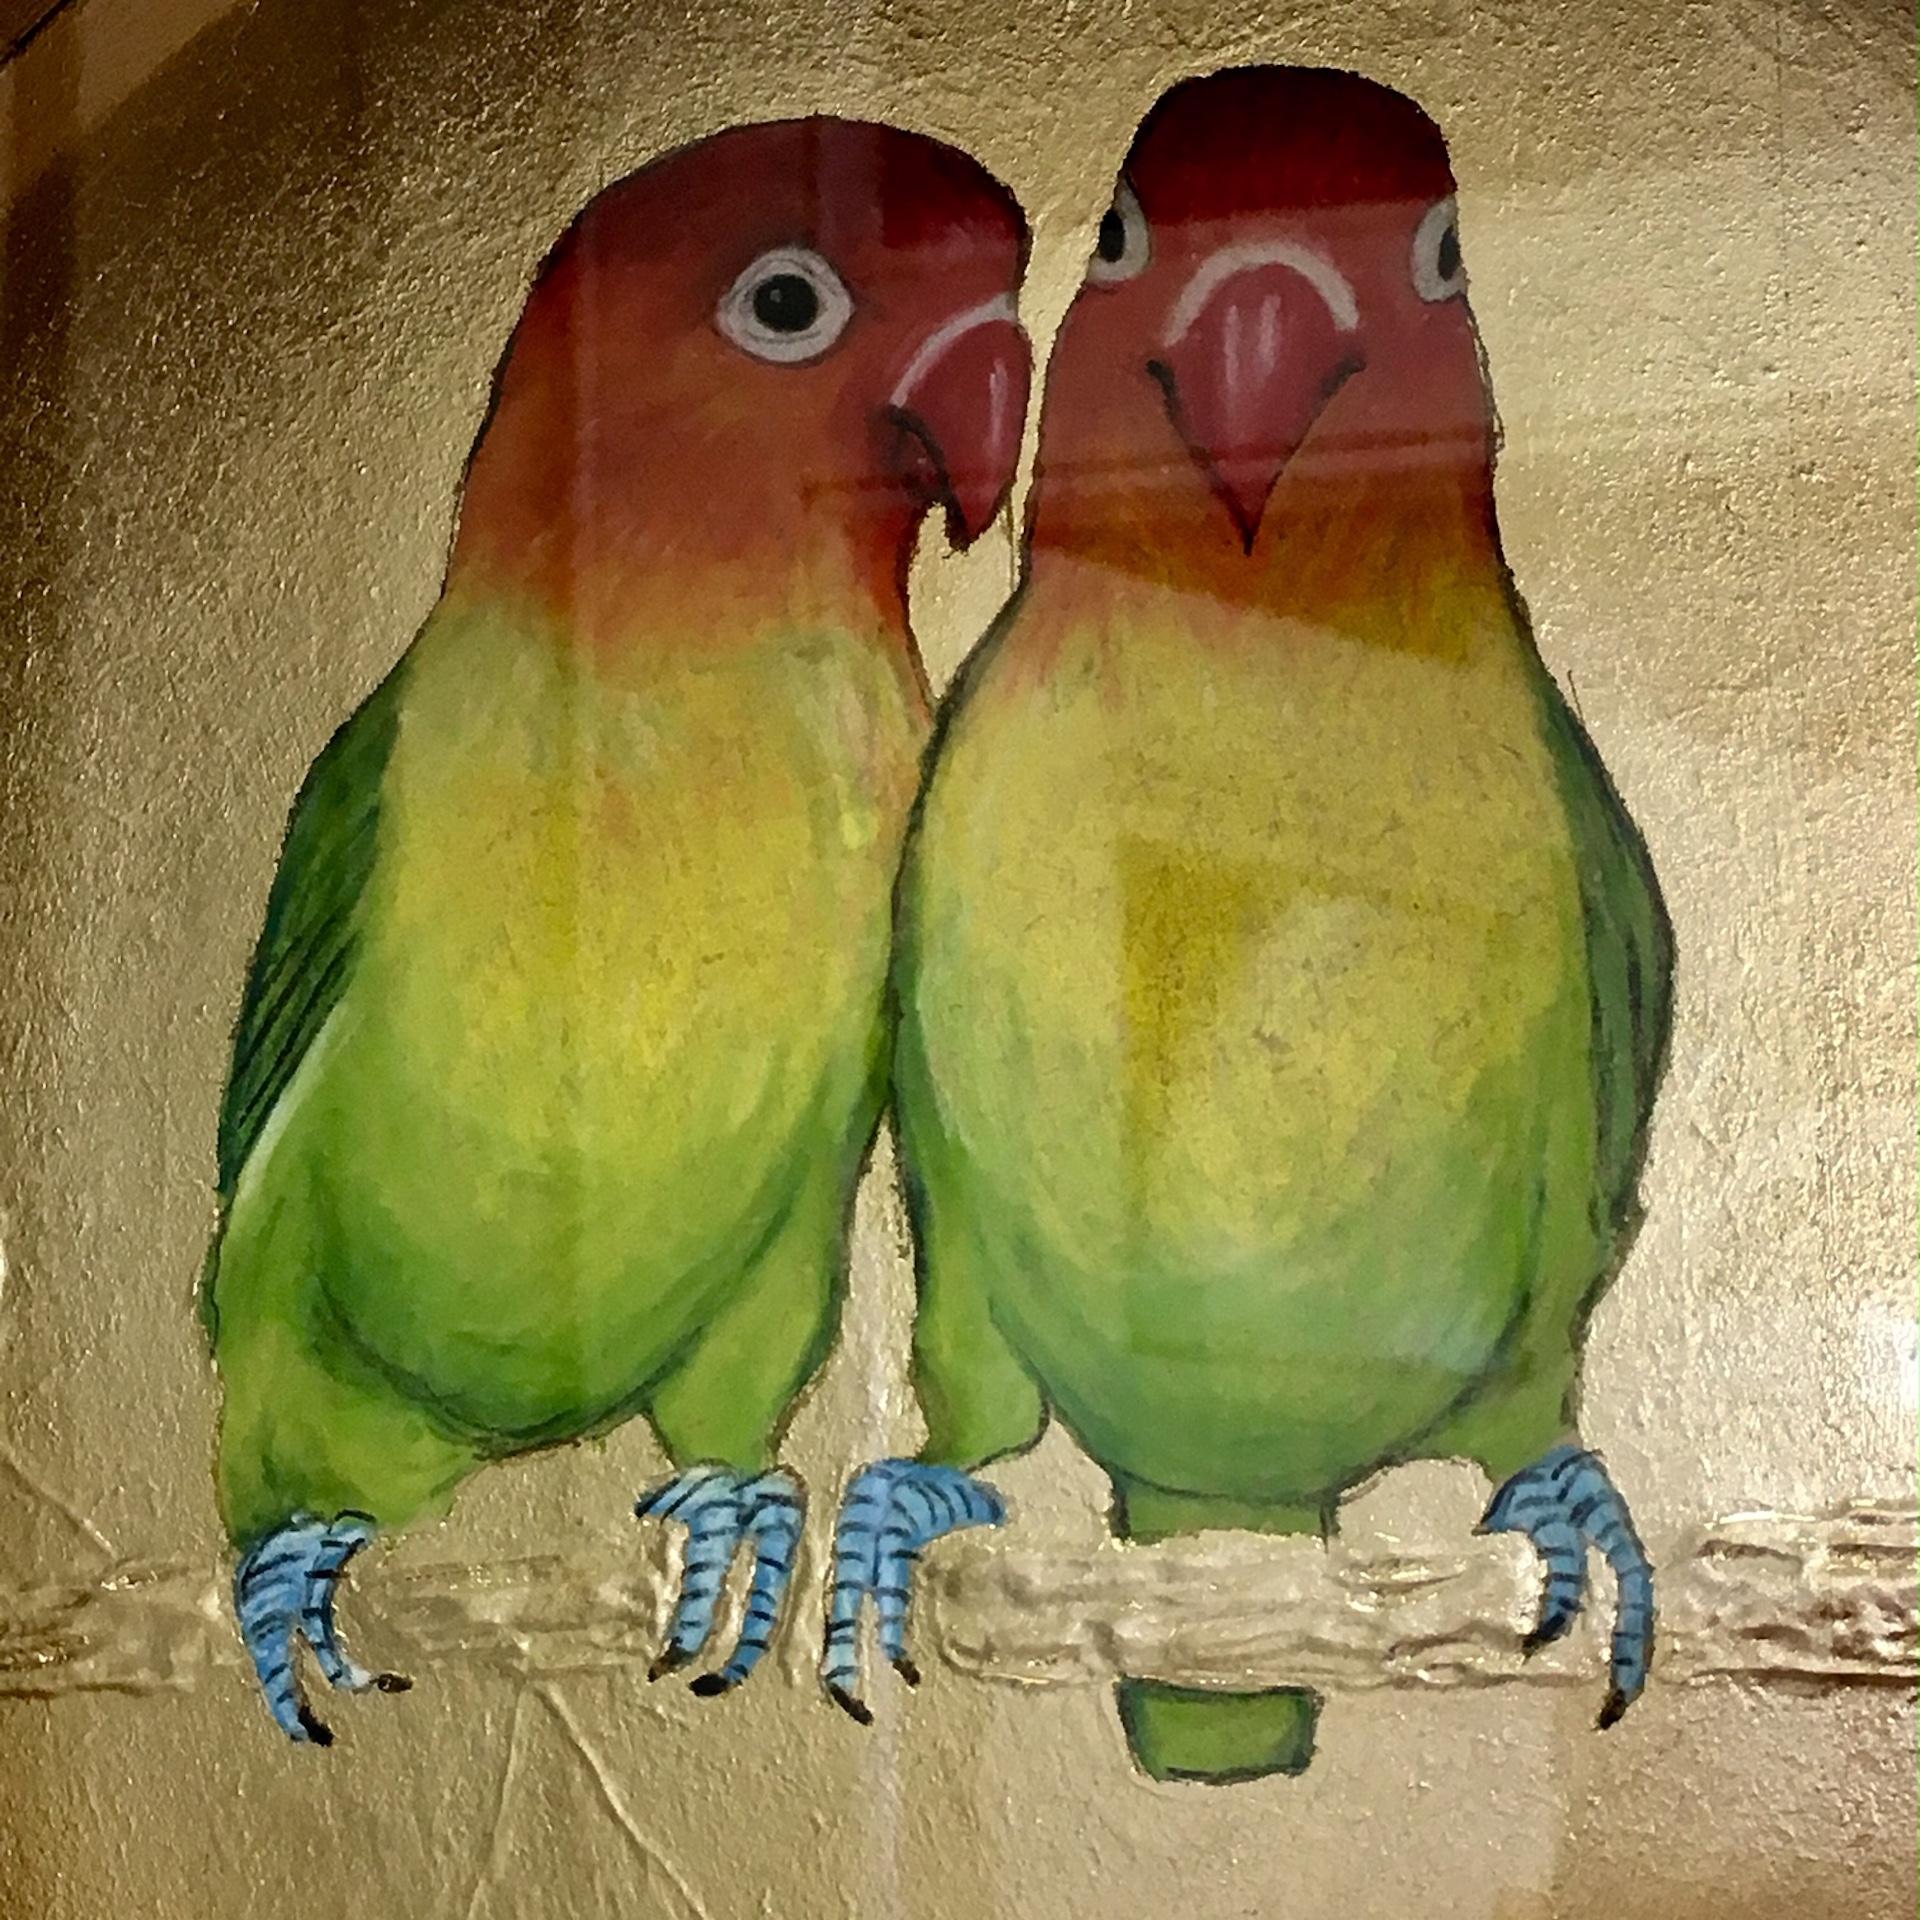 Sally-Ann Johns
Love Birds
Original Animal Drawing
Oil Pastel on Dutch Metal
Framed Size: H 31cm x W 31cm x D 10cm
Sold Framed in a Deep White Circular Frame
Please note that in situ images are purely an indication of how a piece may